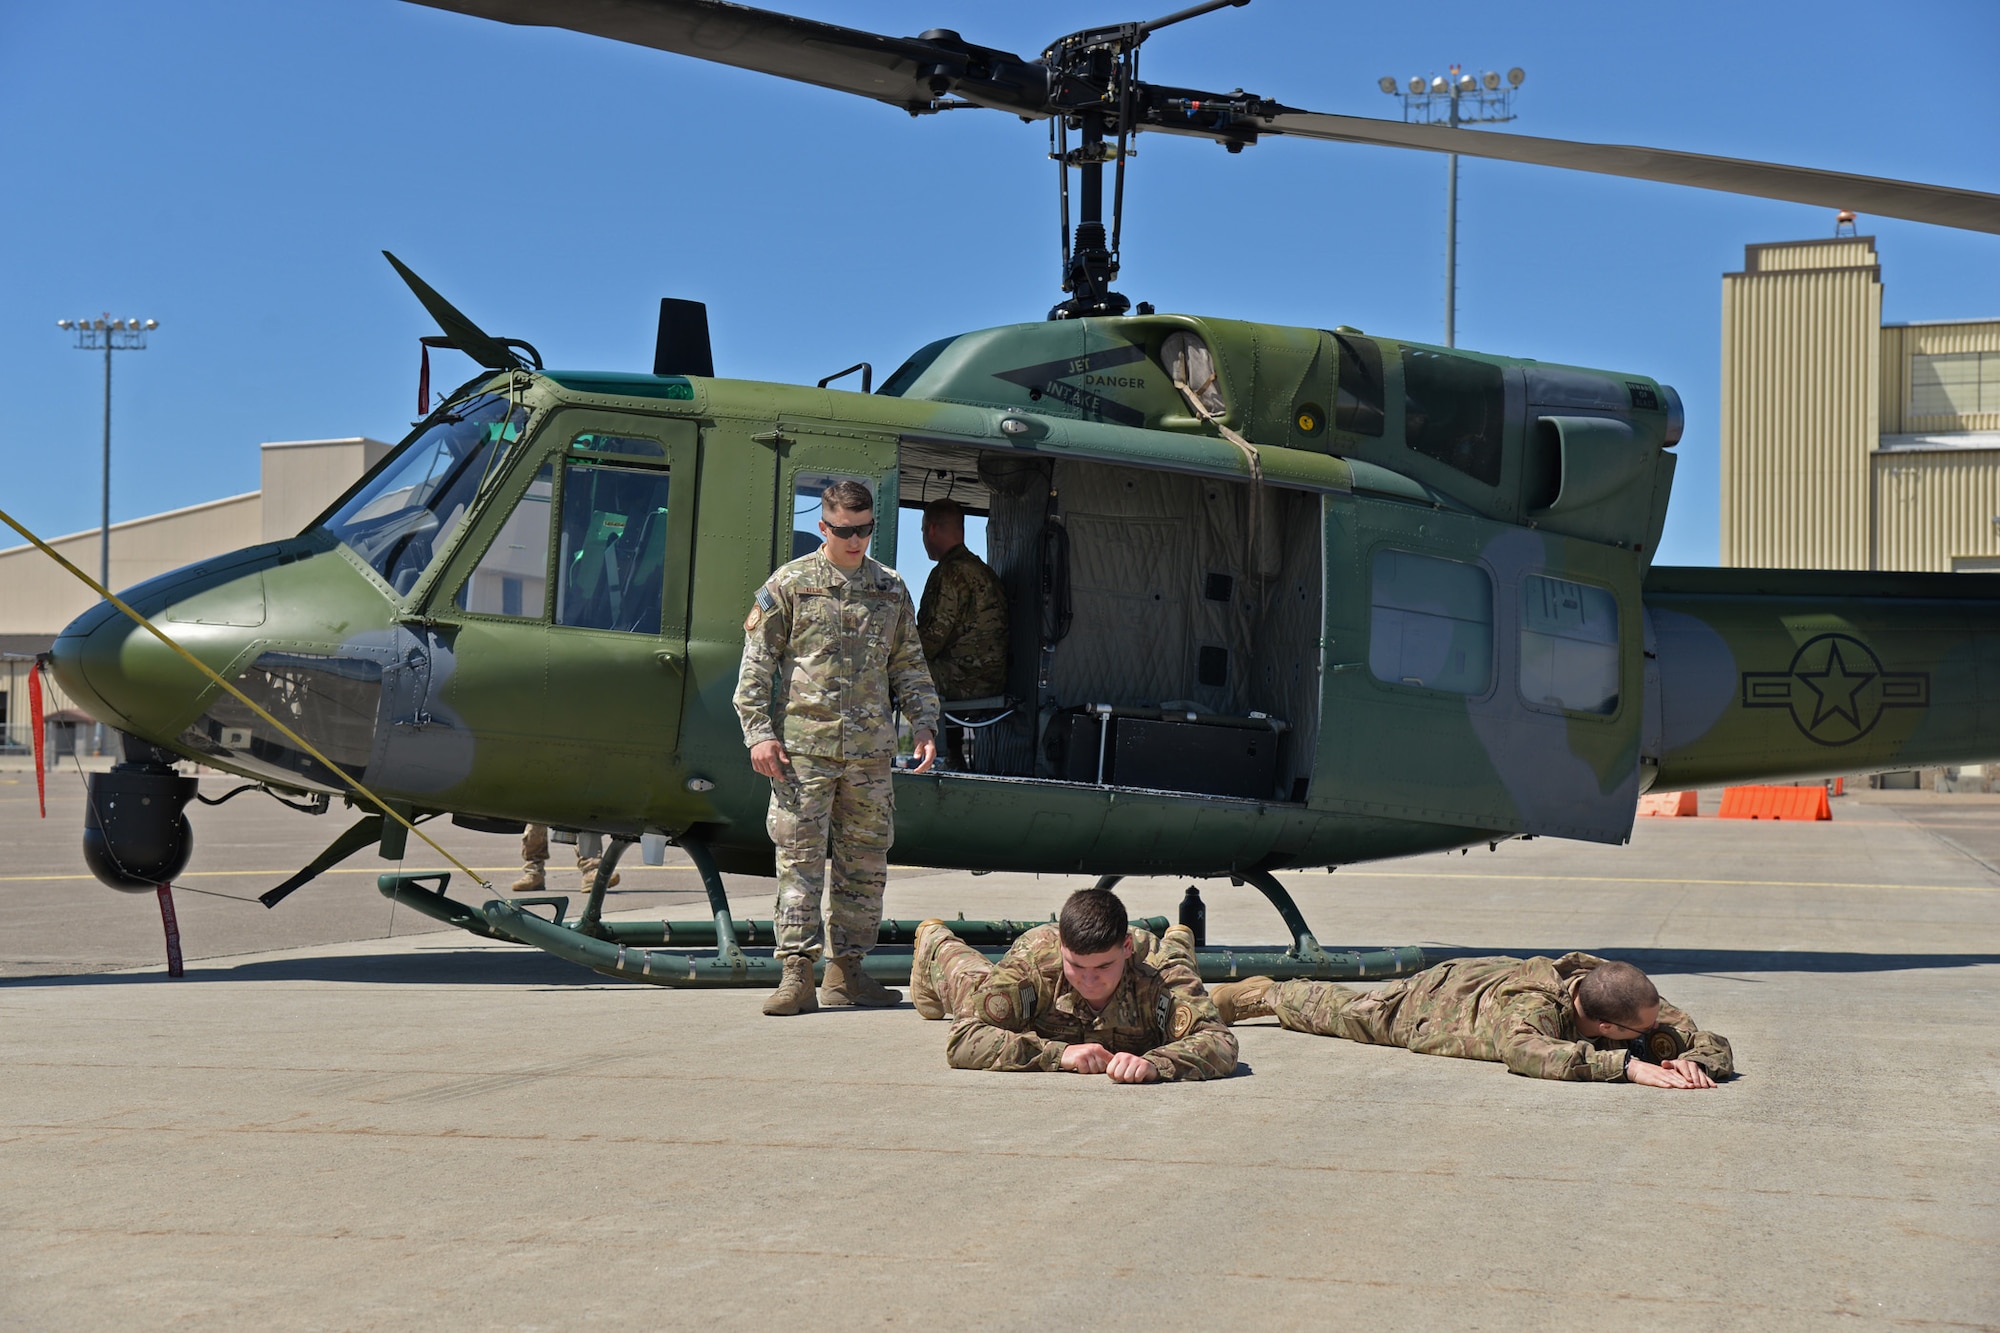 Staff Sgt. Jonathan Kitts, 741st Missile Security Forces Squadron Tactical Response Force flying program manager, left, trains Airman 1st Class Luke Gorst, 741st MSFS defender, center, and Senior Airman Robert Darcy, 741st MSFS Convoy Response Force defender, during joint fires observer training May 8, 2017, at Malmstrom Air Force Base, Mont. JFO training consists of Airmen traveling to Fort Sill, Oklahoma, for two weeks to learn to communicate over radios, assess ranges of targets, properly read a map and call for different close air support, whether working with the Army, Navy, Marines or Coast Guard, or receiving support from aircraft or ships. The members then come back to Malmstrom for more training to learn additional tools and techniques centric to the base’s mission. (U.S. Air Force photo/Airman 1st Class Daniel Brosam)